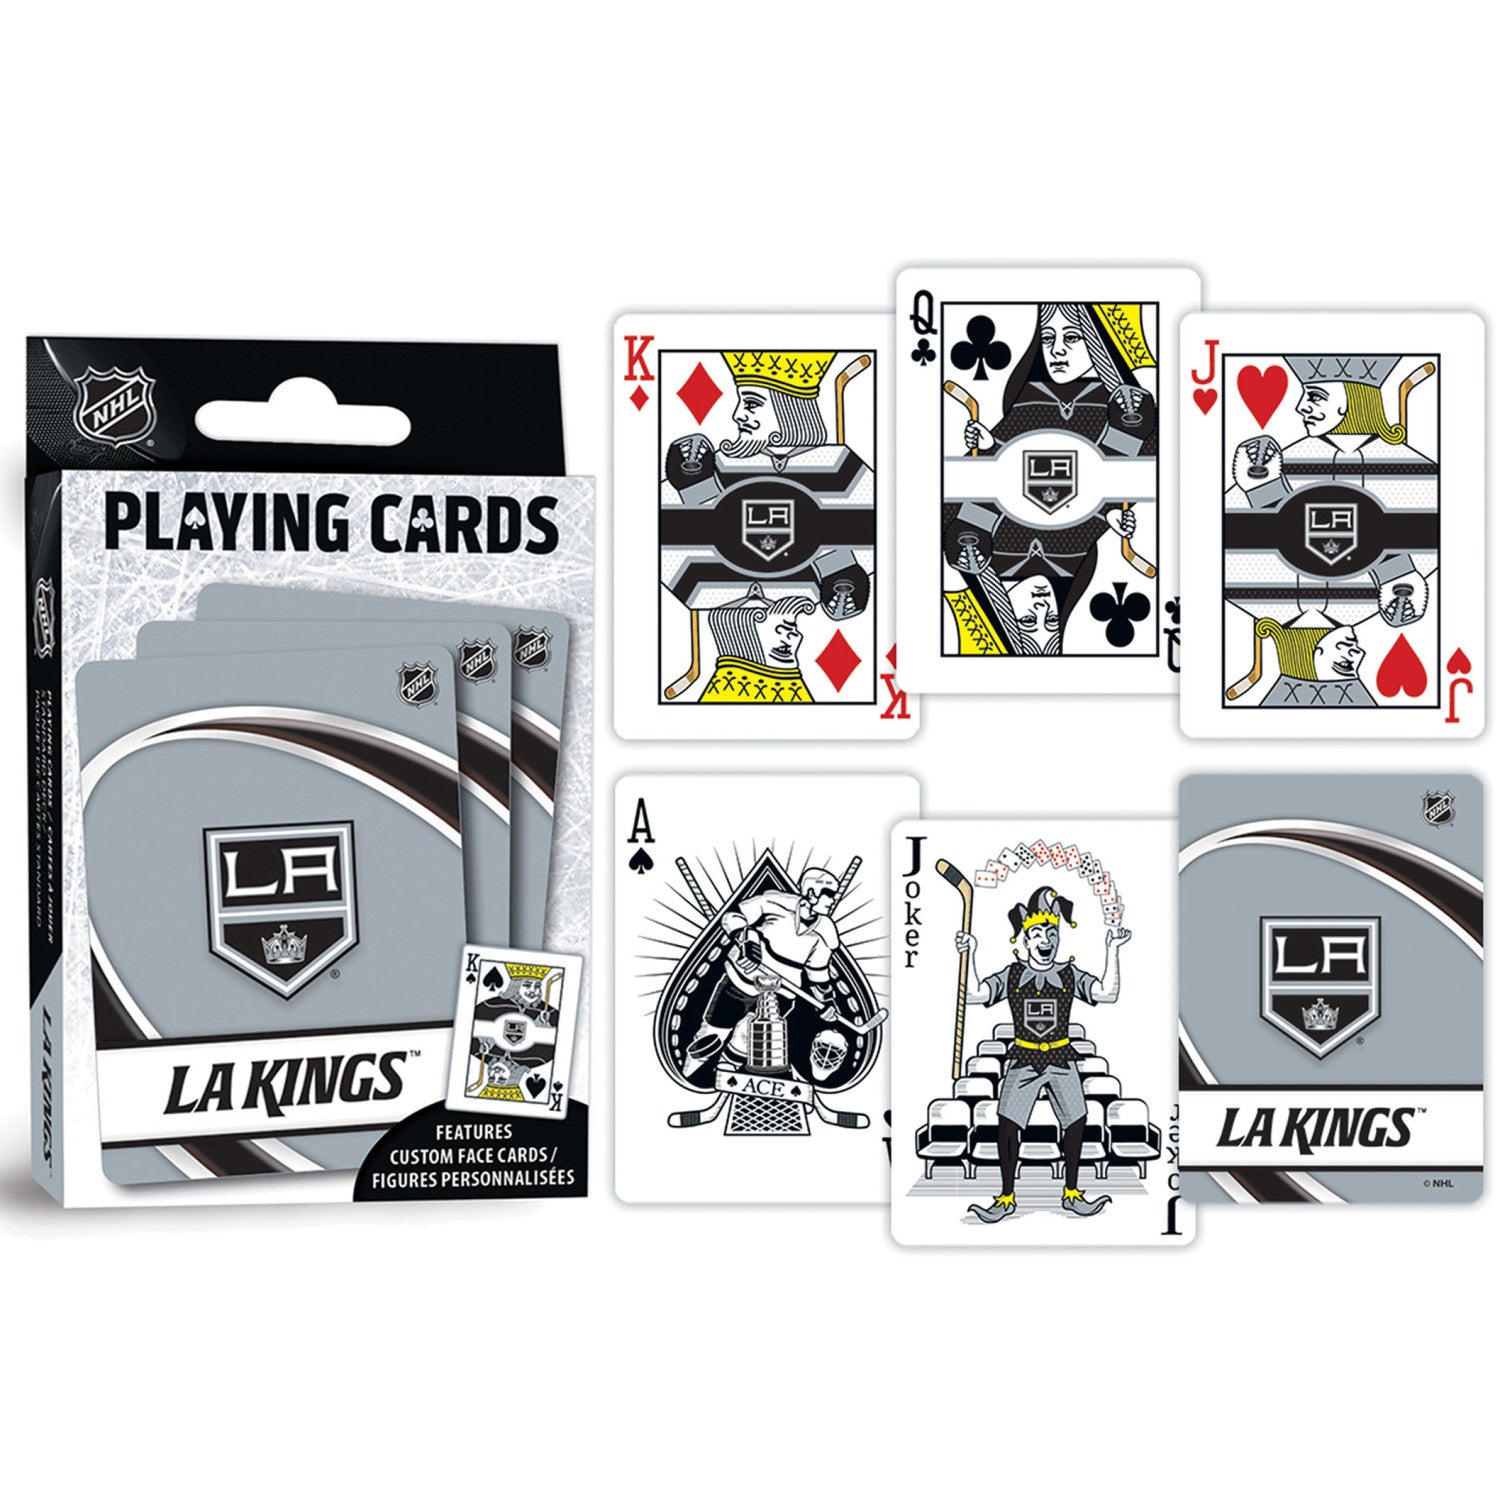 Los Angeles Kings Playing Cards - 54 Card Deck